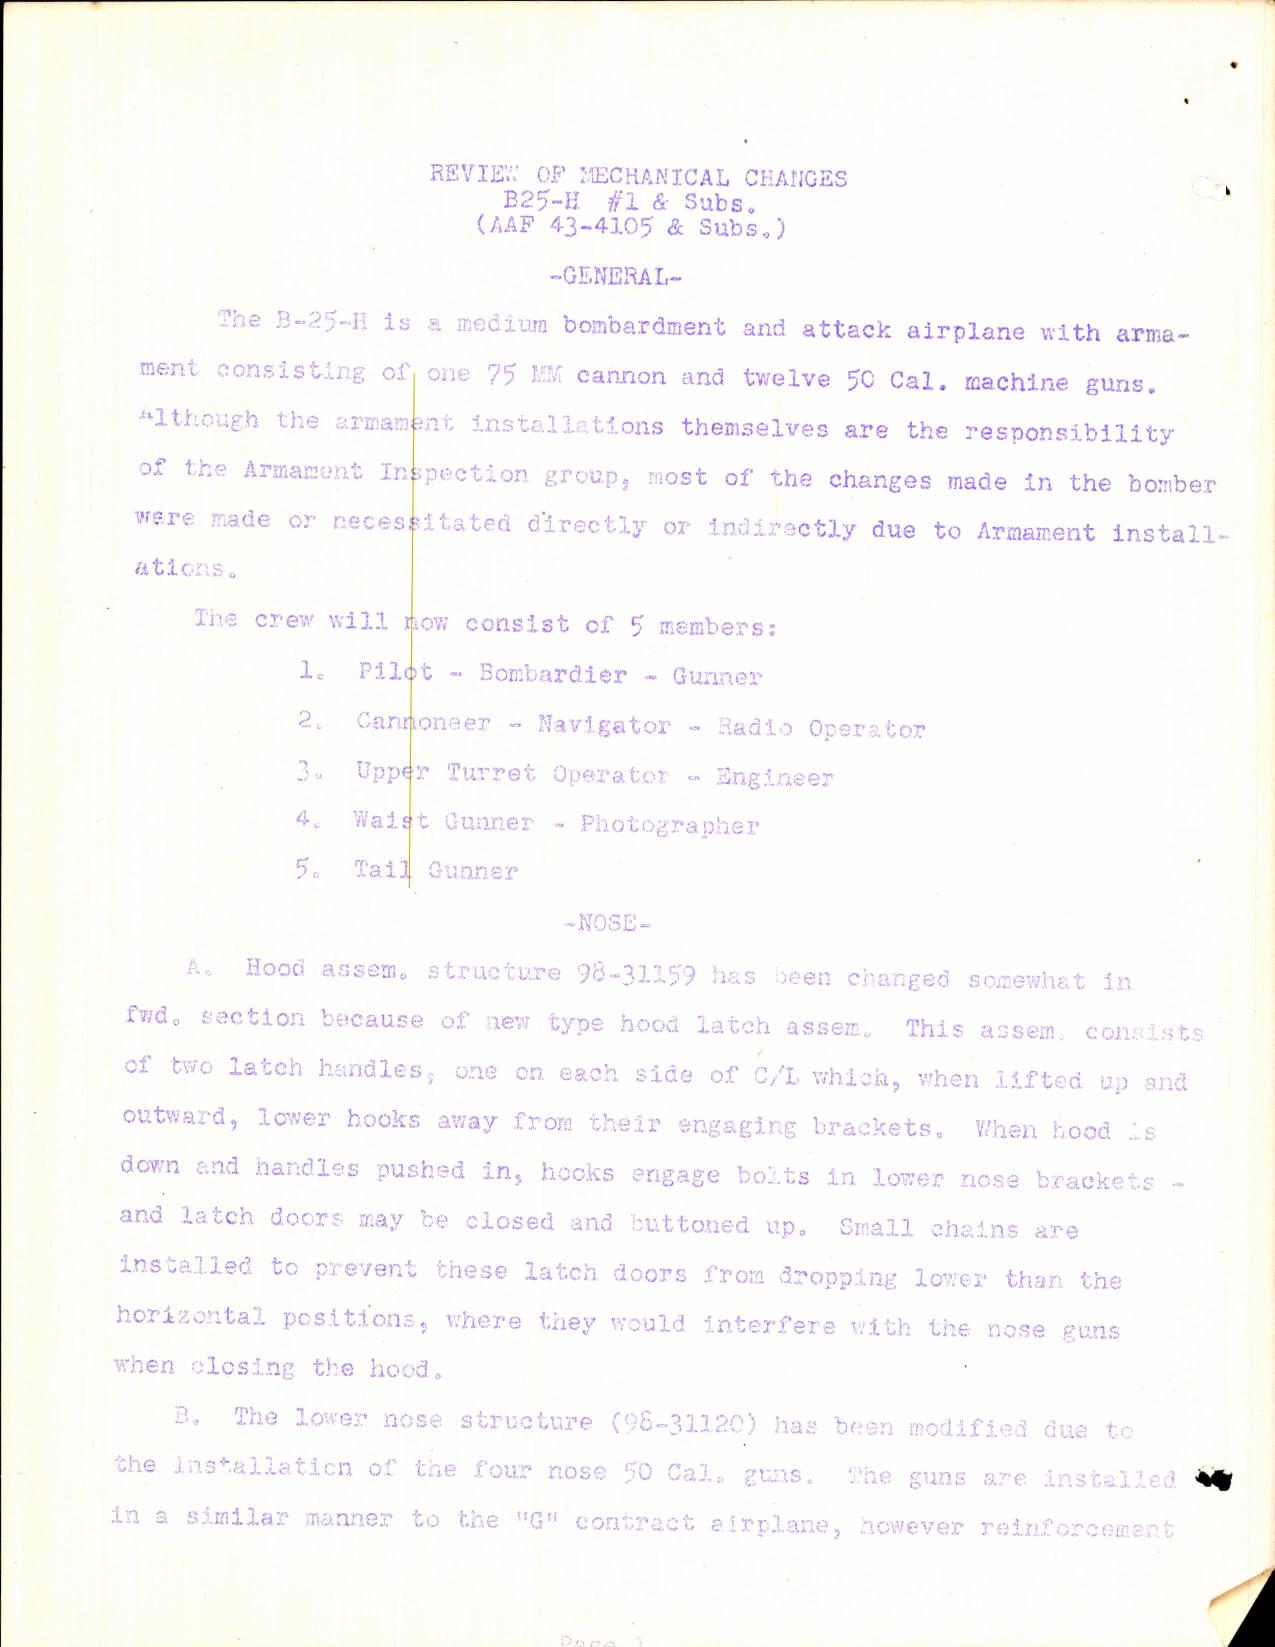 Sample page 4 from AirCorps Library document: Review of Mechanical Changes for B-25H #1 and Subs